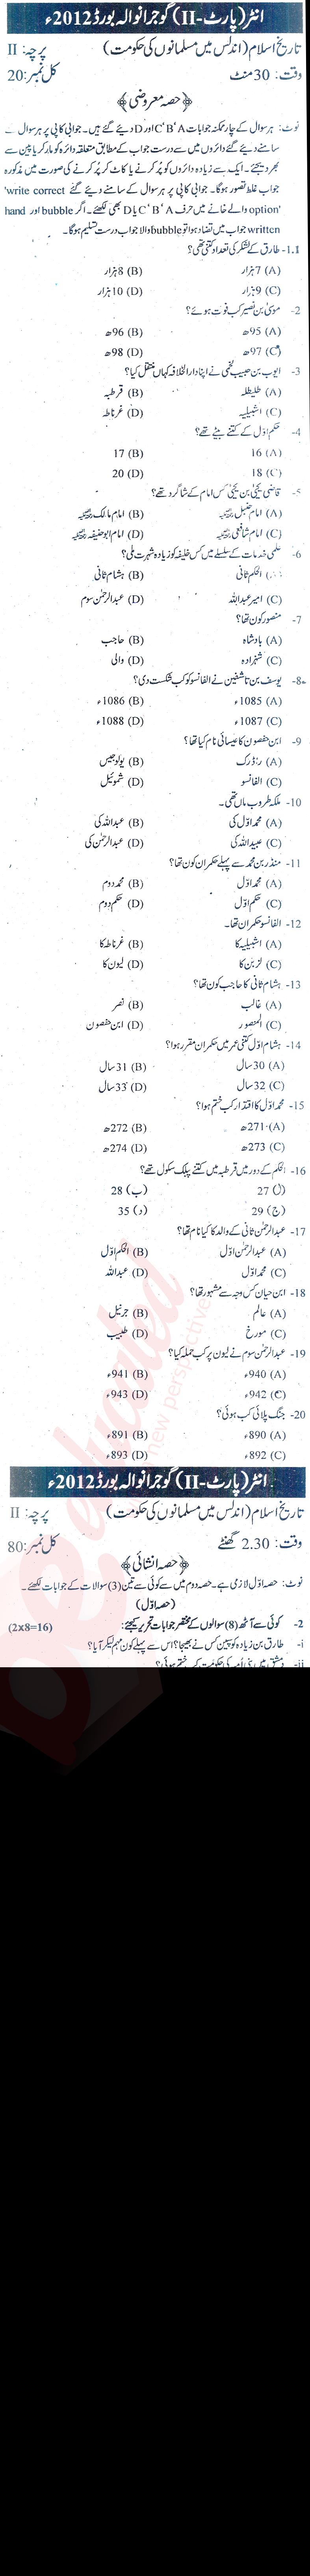 Islamic History FA Part 2 Past Paper Group 2 BISE Gujranwala 2012